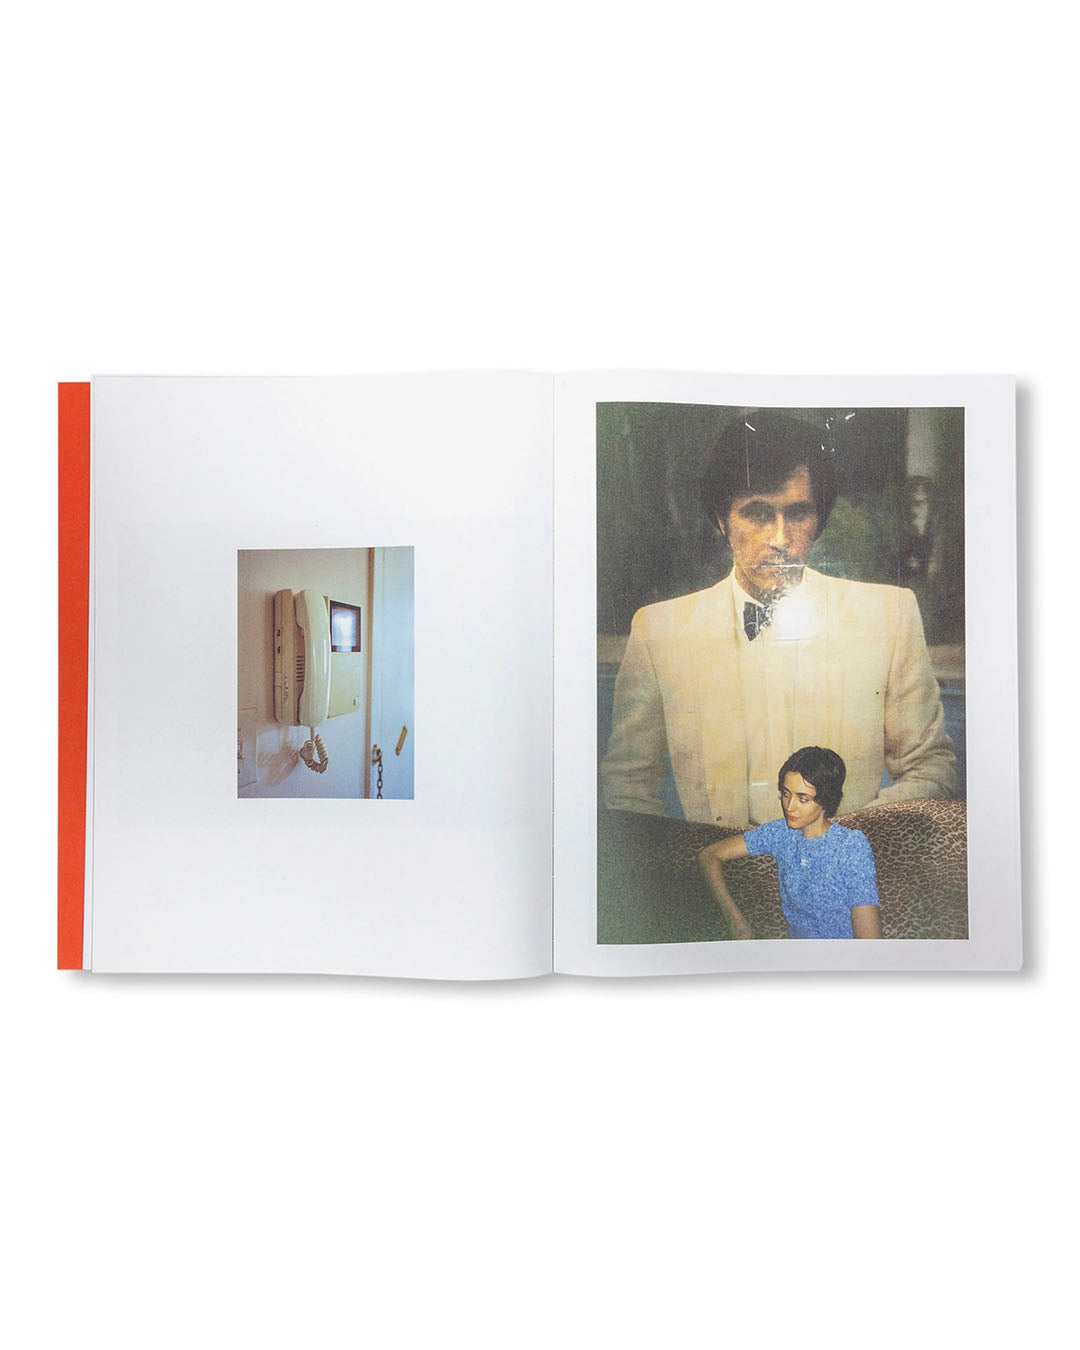 [QUENTIN DE BRIEY] THANK YOU FOR YOUR BUSINESS by Quentin de Briey [FIRST EDITION]